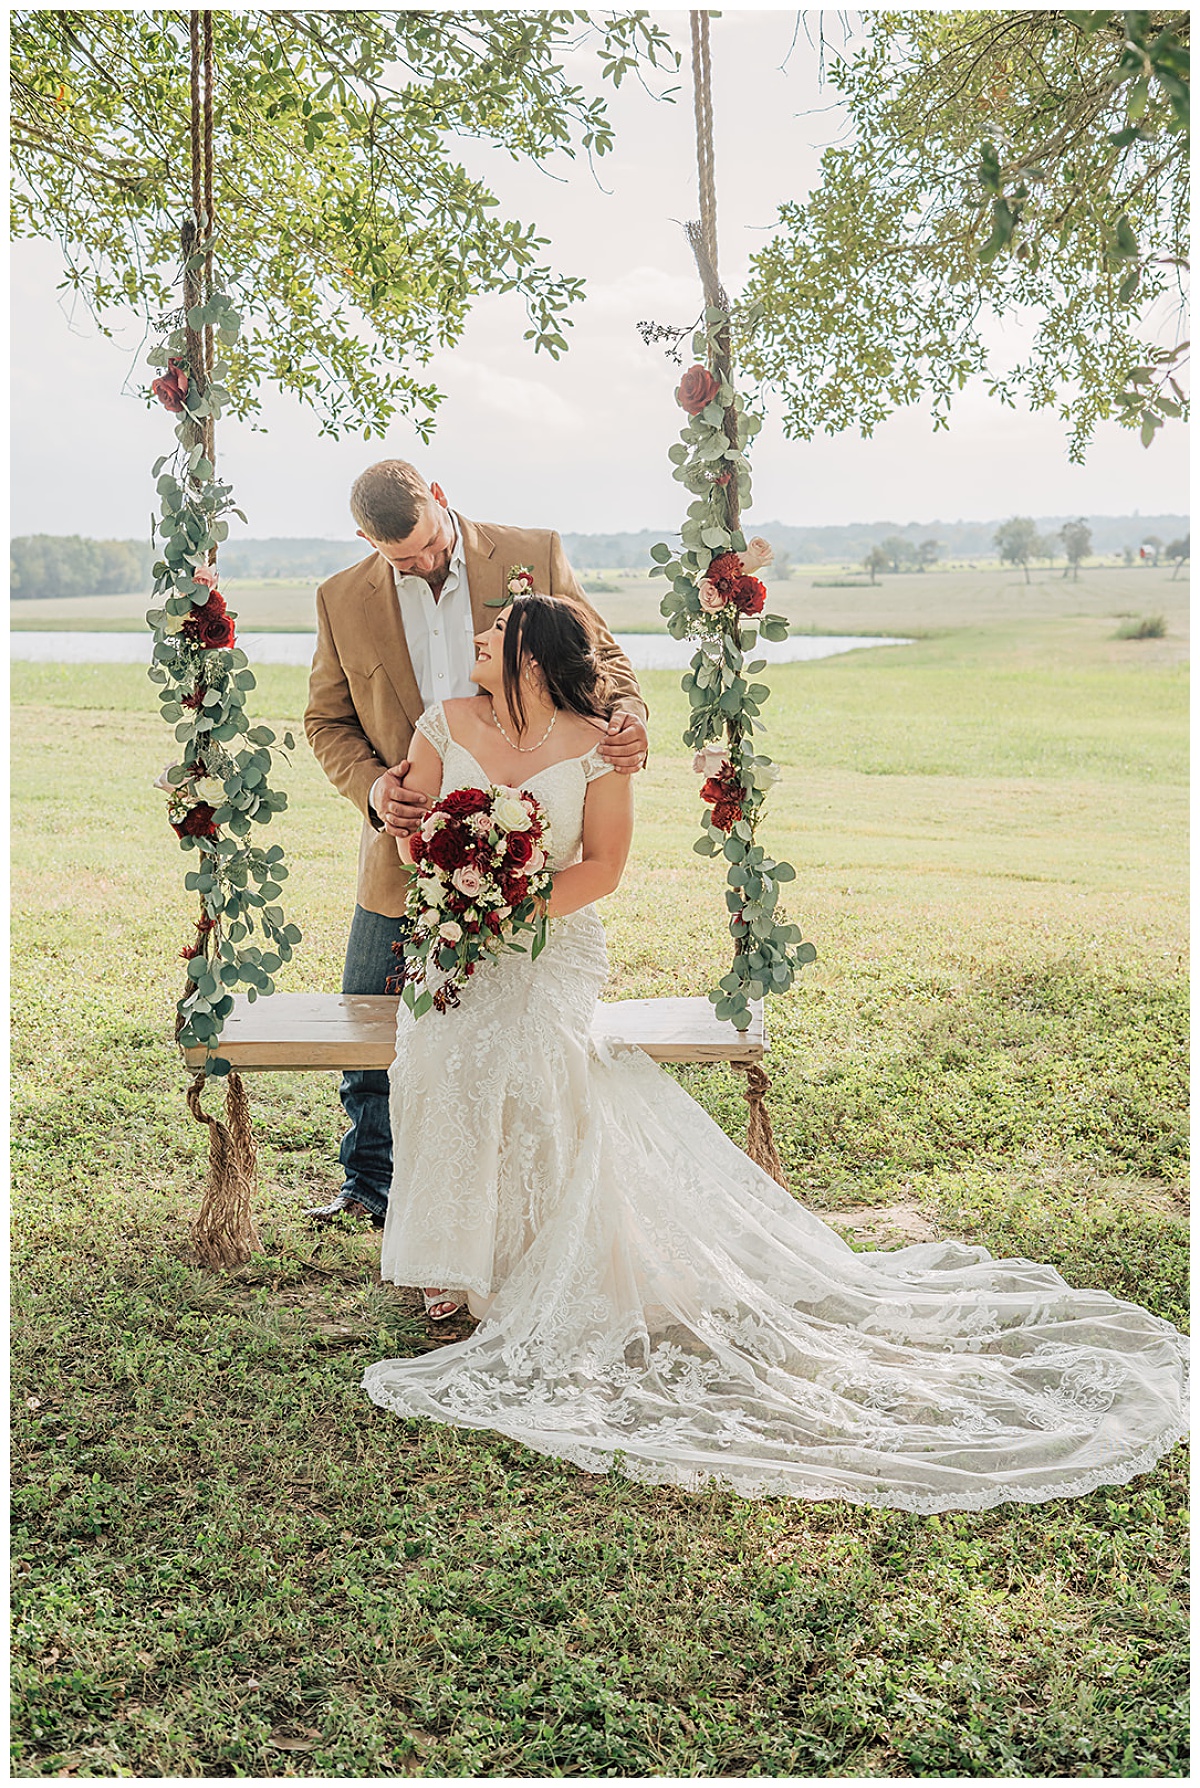 Wedding couple at Emery's Buffalo Creek swing located in Bellville, TX. Samantha O' Neal Photography